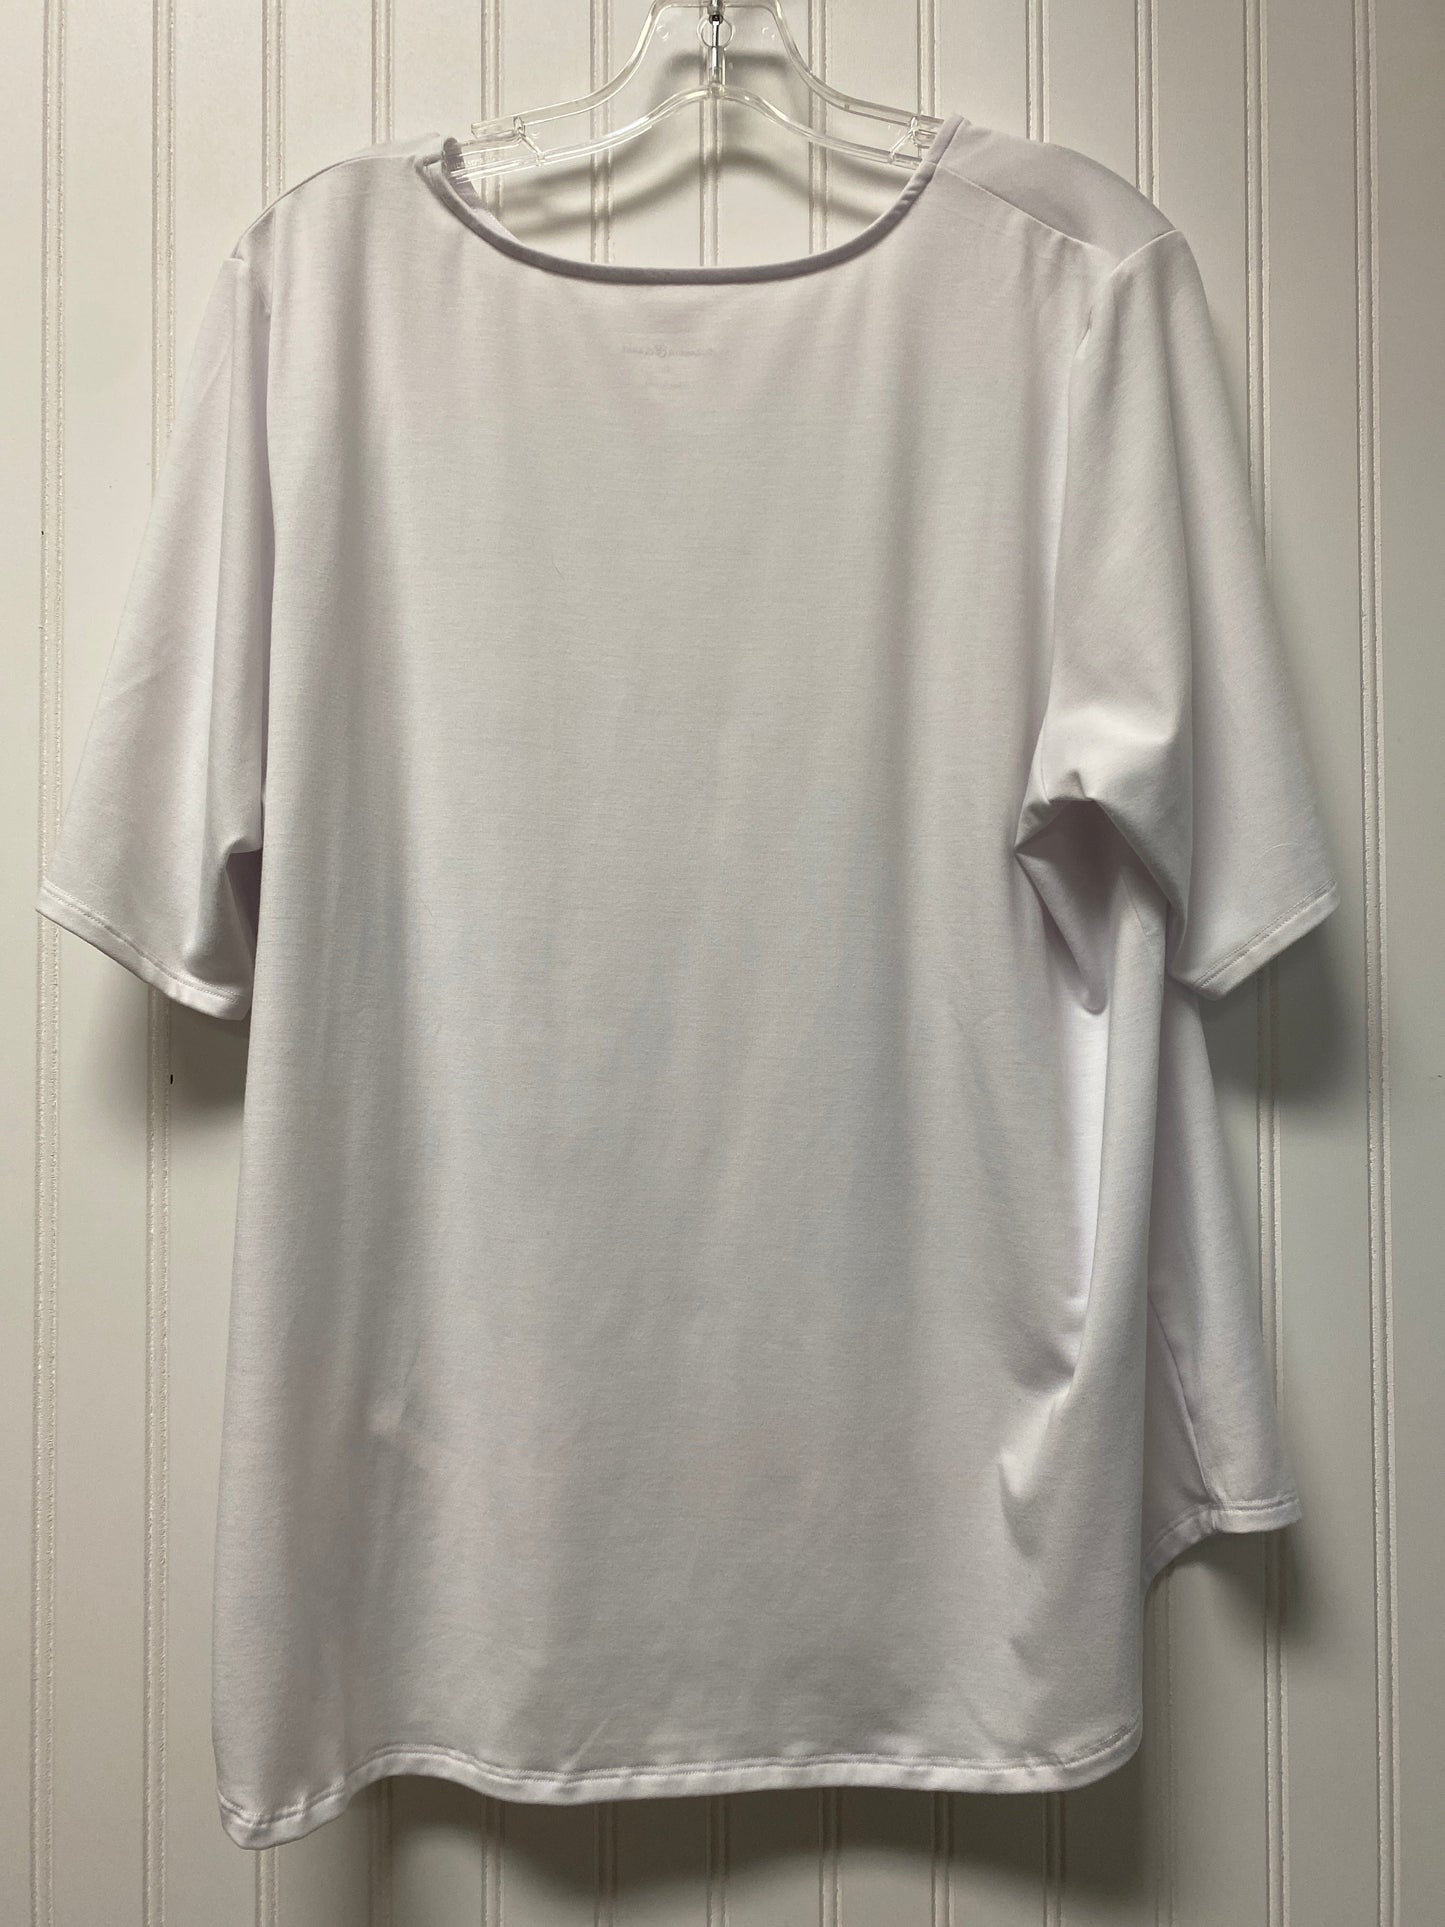 White Top Short Sleeve Basic Clothes Mentor, Size Xl